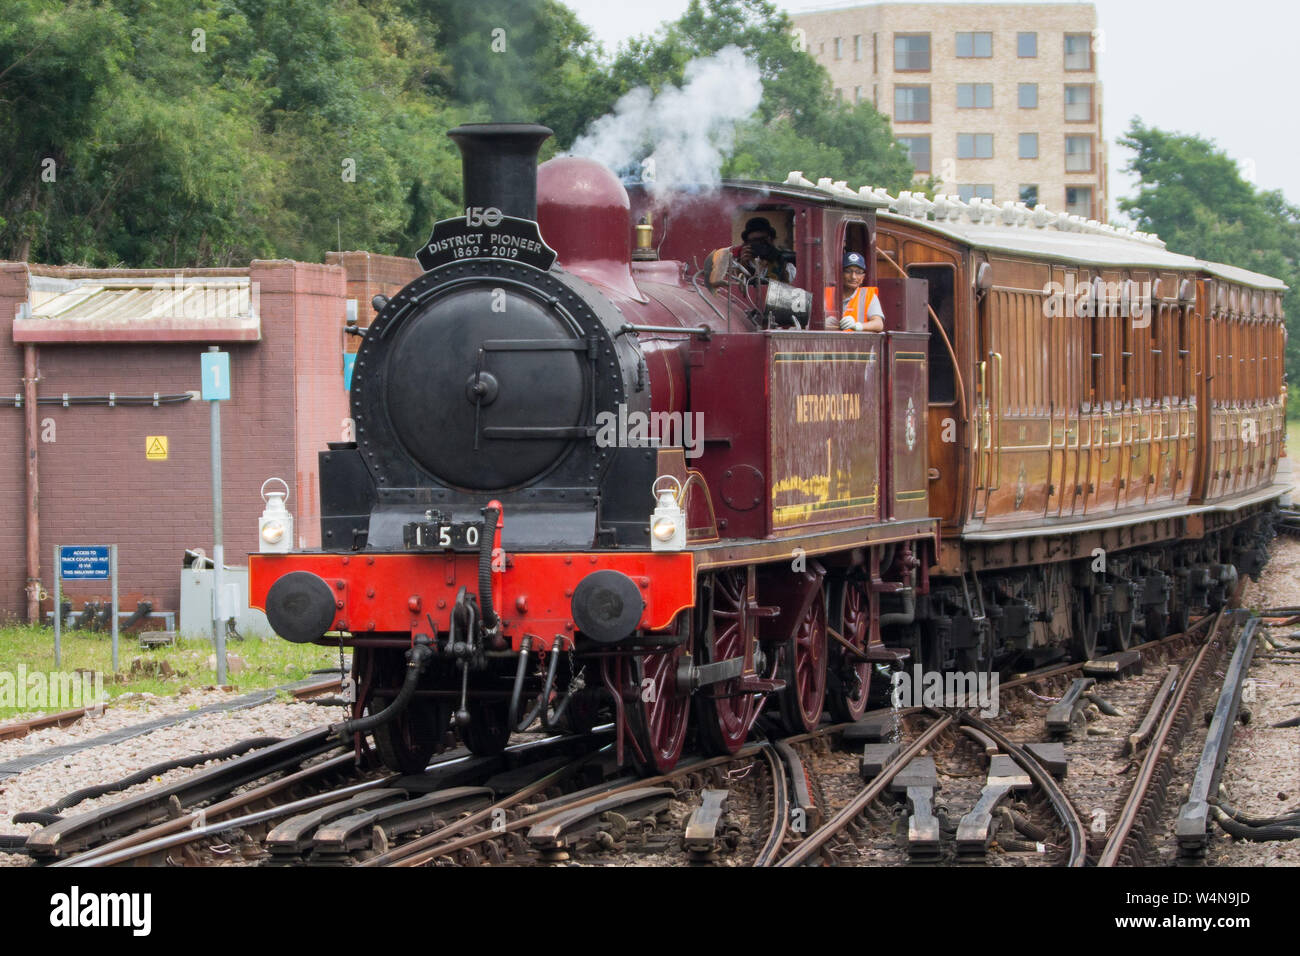 Marking the 150th anniversary of the District line, a steam train runs along parts of the London Underground. This will be the last time steam trains are expected to travel into central London on the Underground network, due to signalling modernisation.  Featuring: Atmosphere, View, District Line Where: London, United Kingdom When: 23 Jun 2019 Credit: Wheatley/WENN Stock Photo